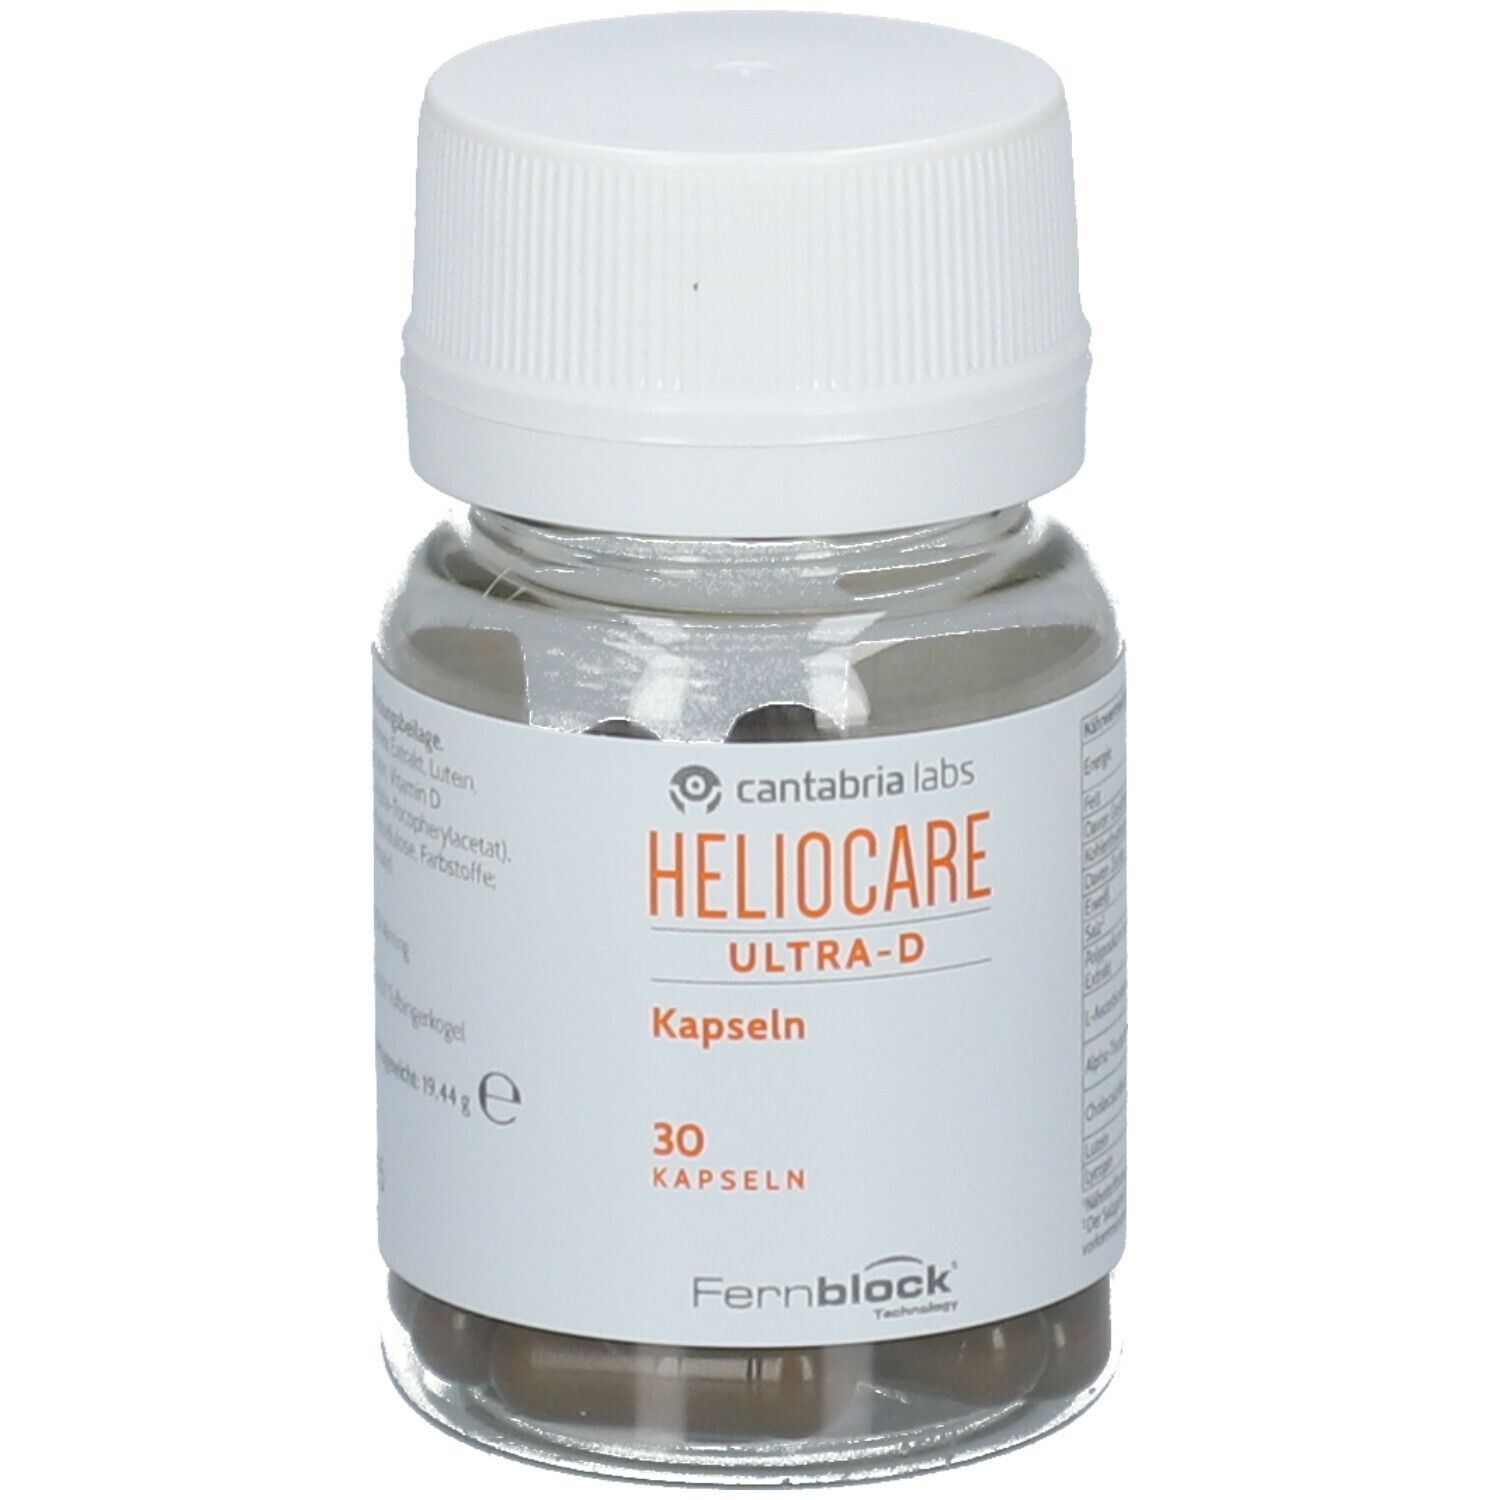 HELIOCARE® Ultra-D 30